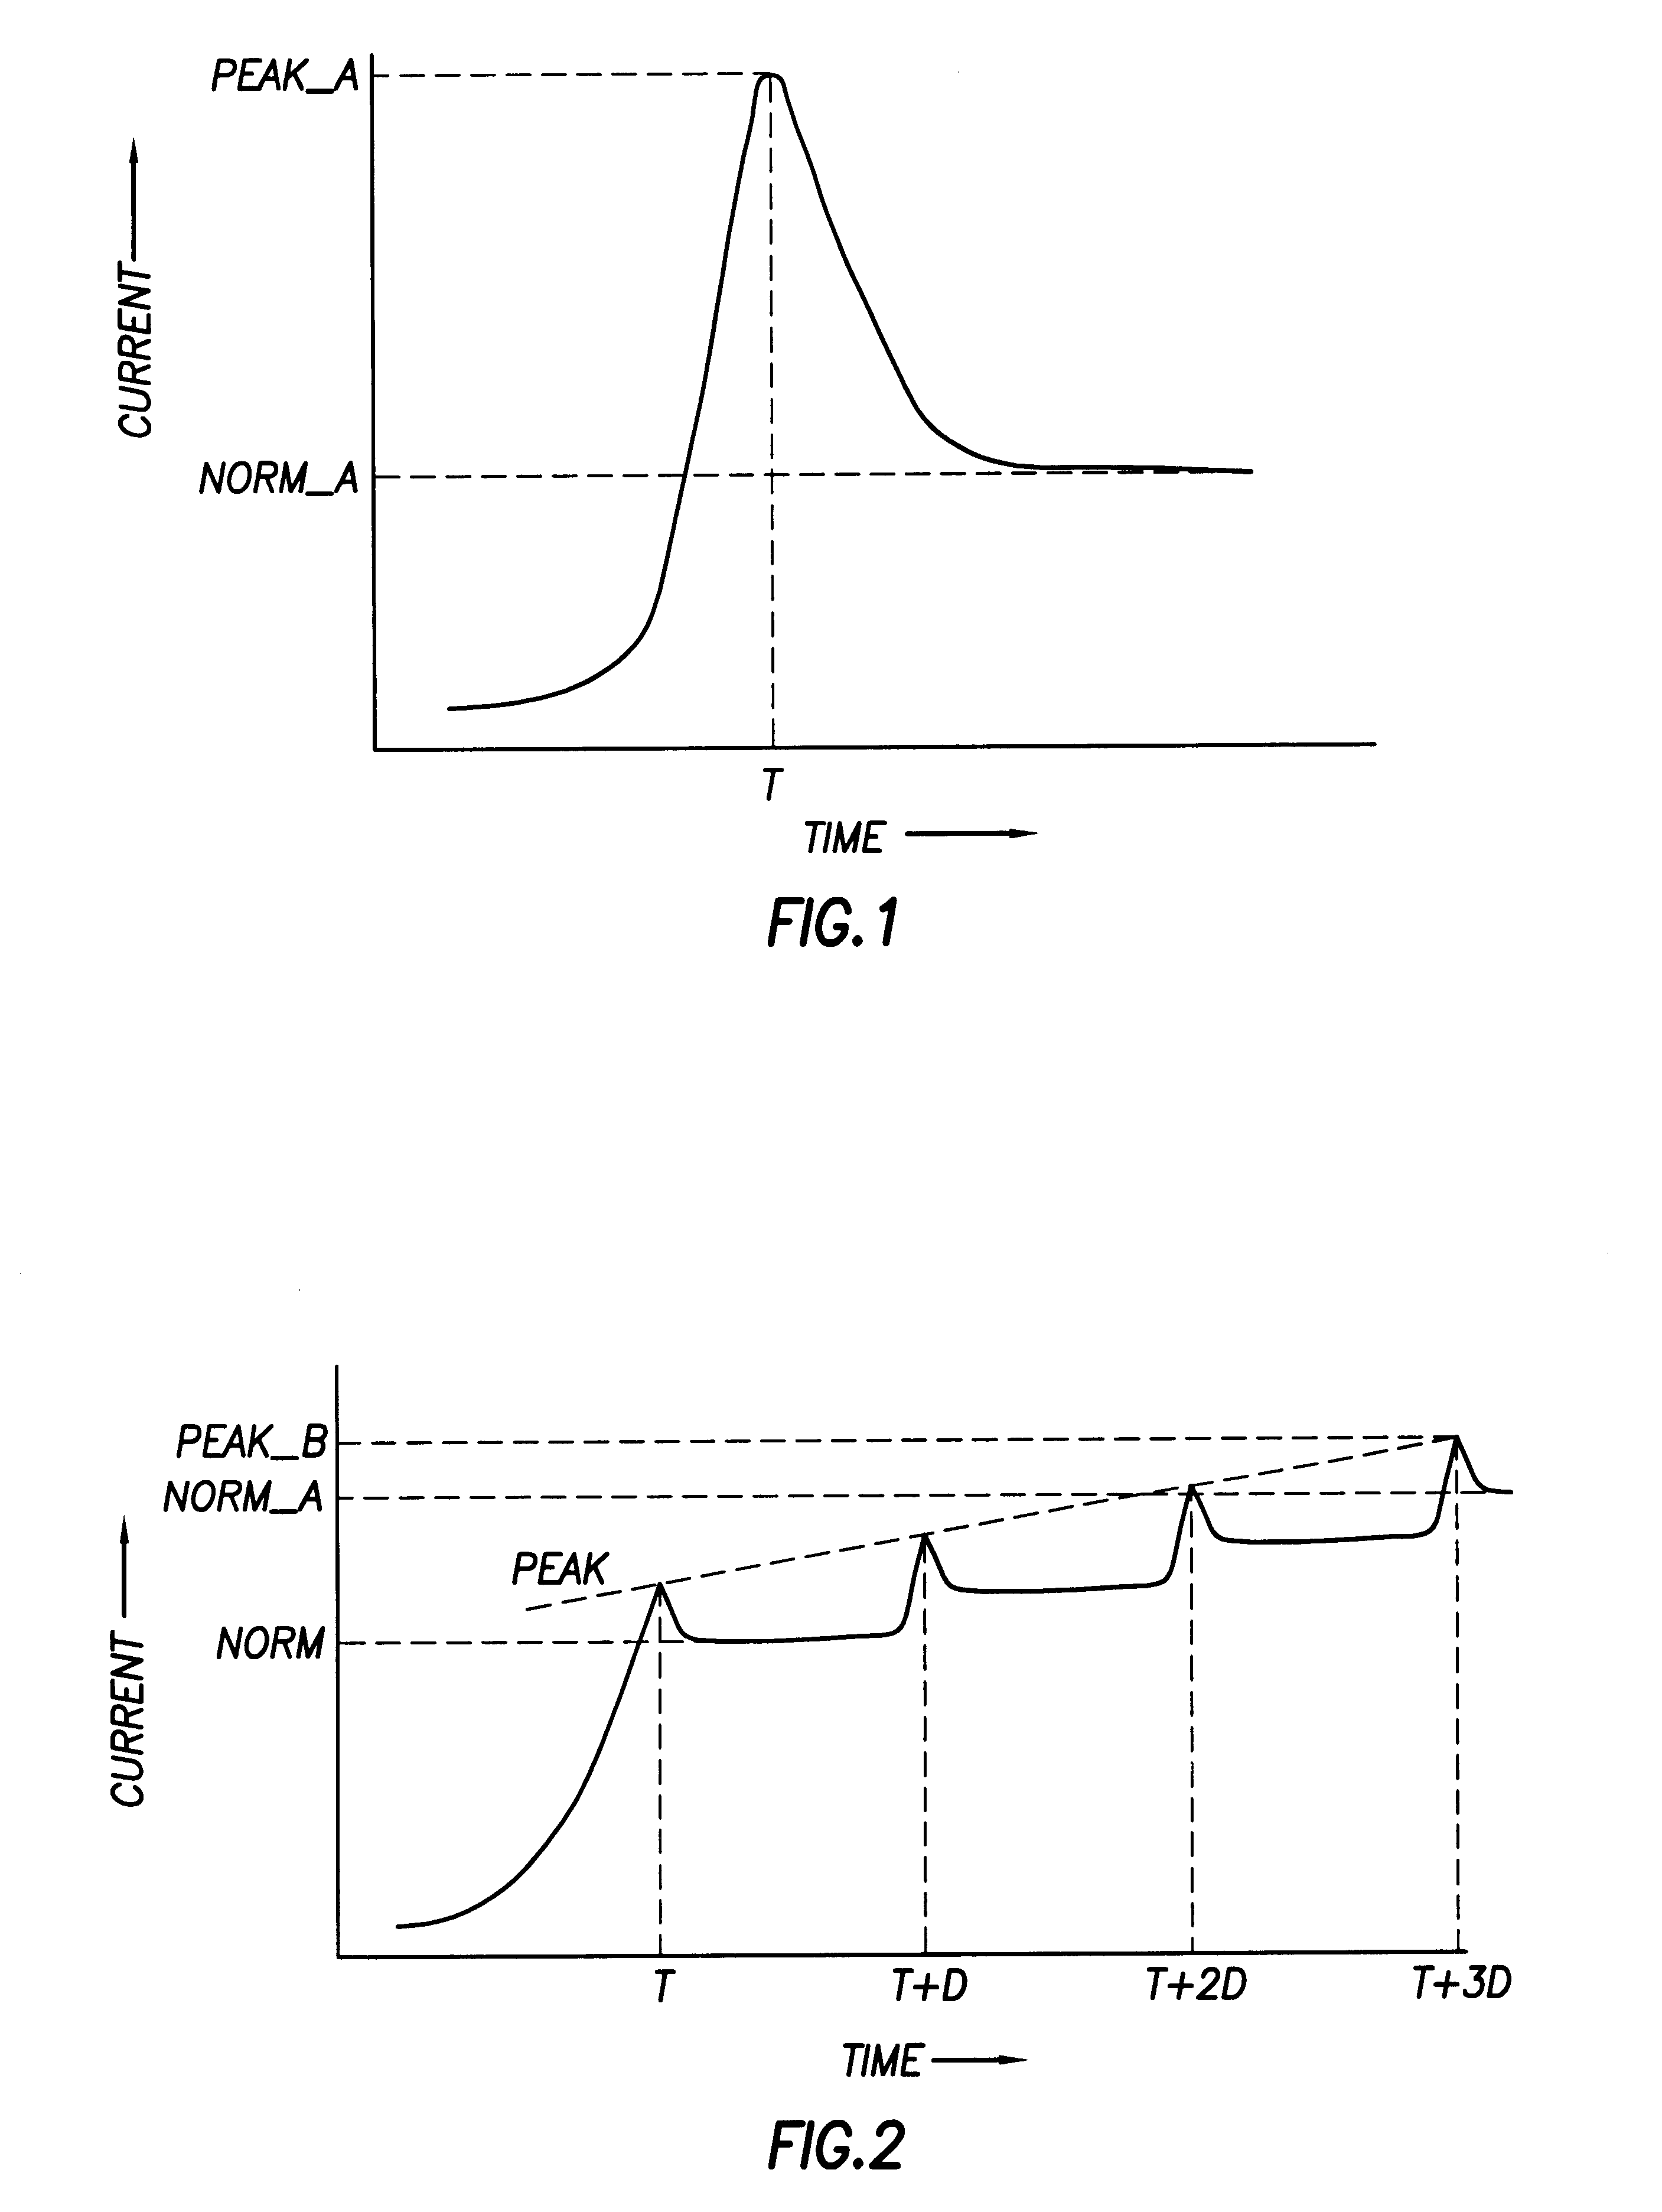 CPU power sequence for large multiprocessor systems